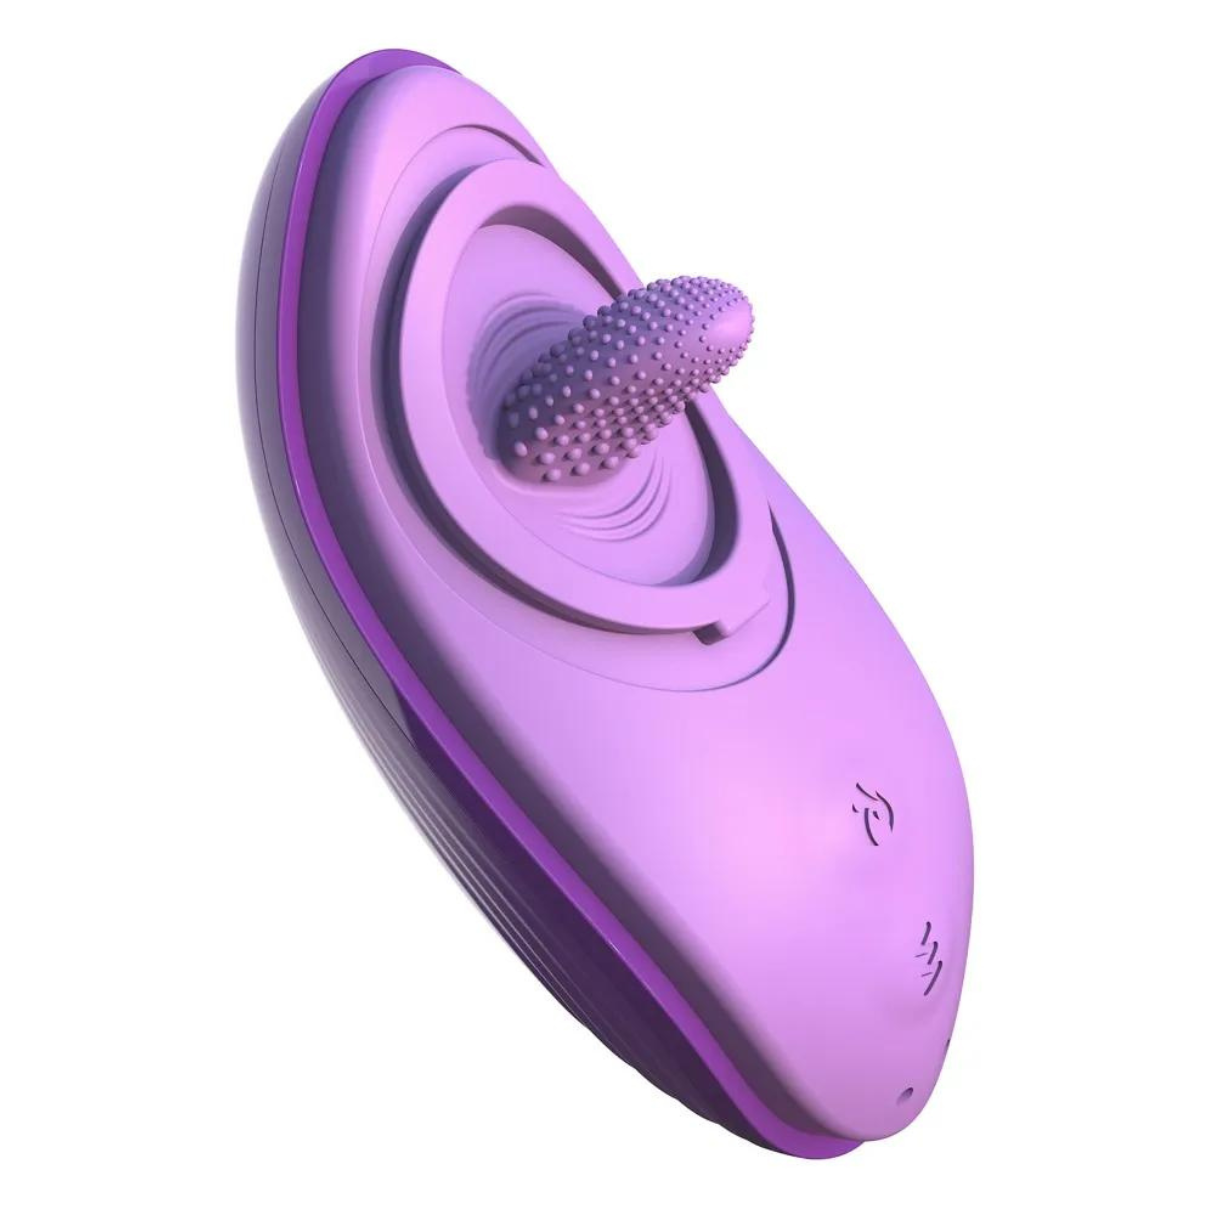 FANTASY Silicone Vibrator Her Tongue Fun HER FOR